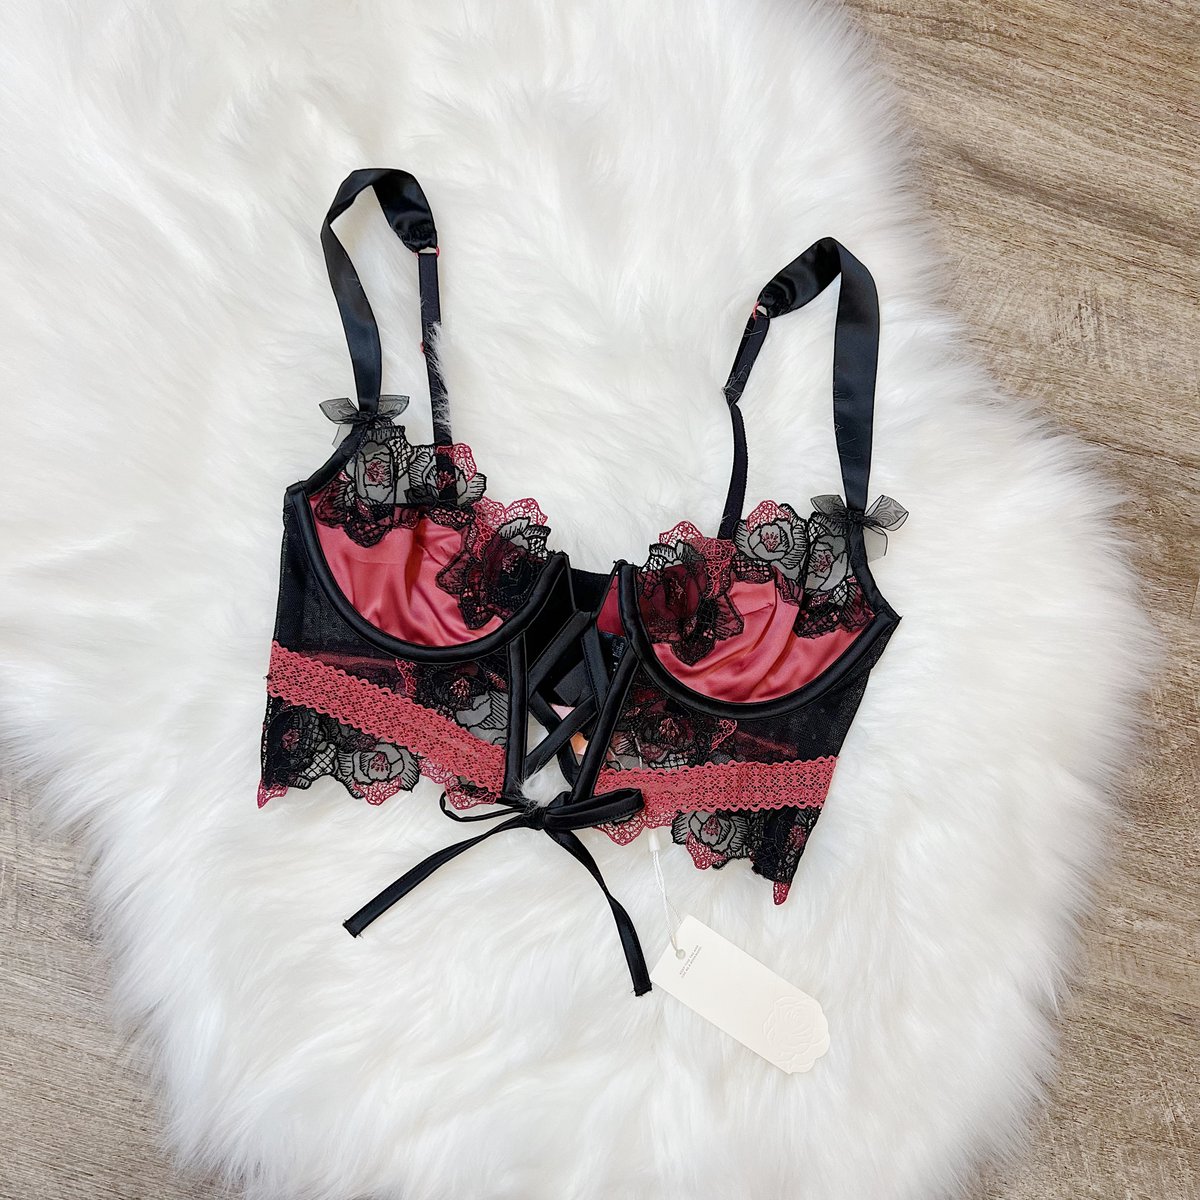 CANADIAN COUTURE RED VINTAGE BUSTIER - (34D/32DD/36C)